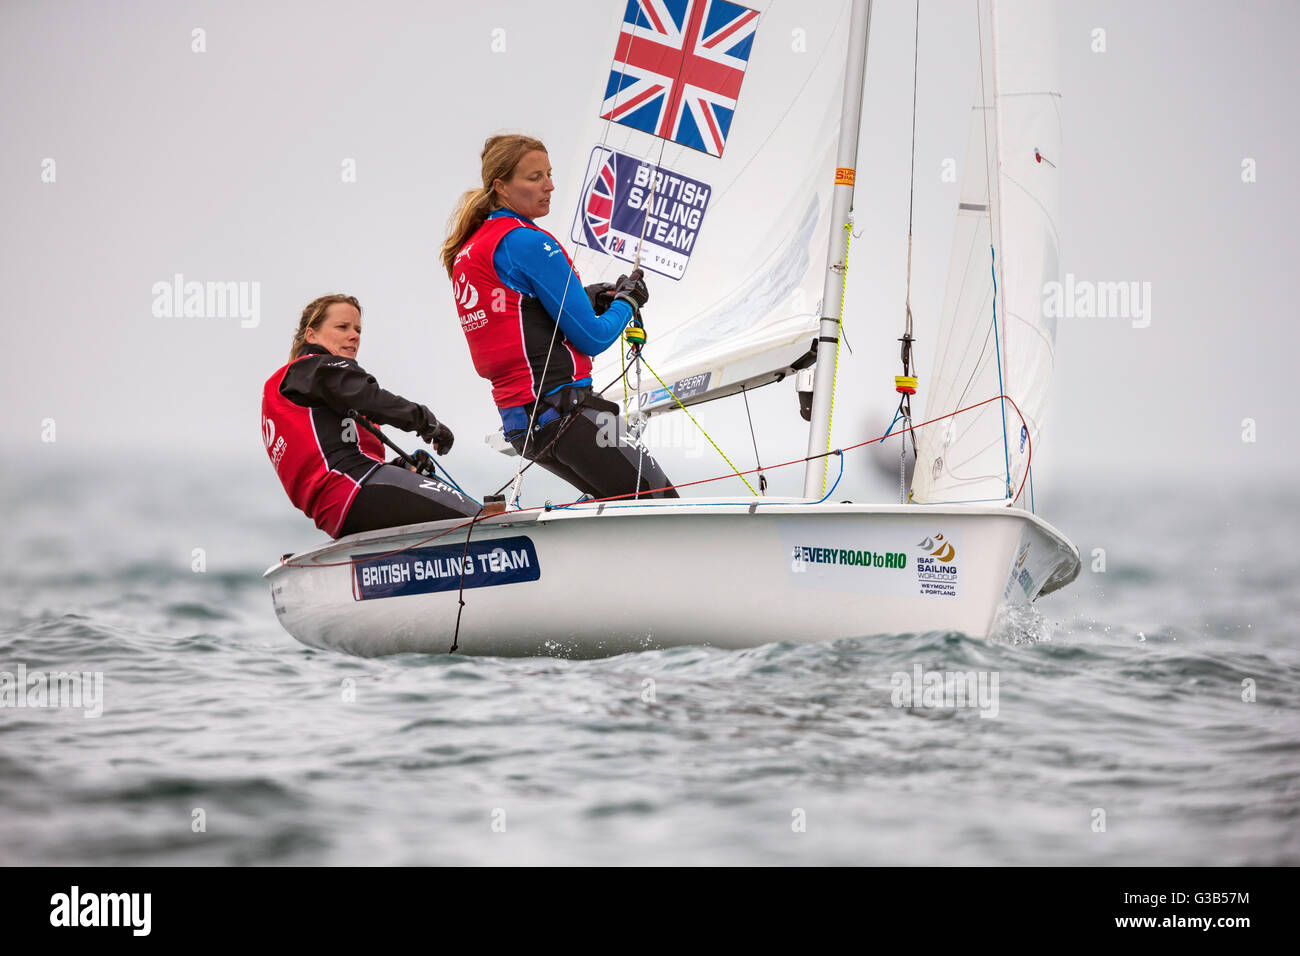 Team GBR Olympic sailors Hannah Mills (left) and Saskia Clark pictured racing their 470 Women's class dinghy on day two of the ISAF Sailing World Cup at the Weymouth and Portland National Sailing Academy, Weymouth. Stock Photo